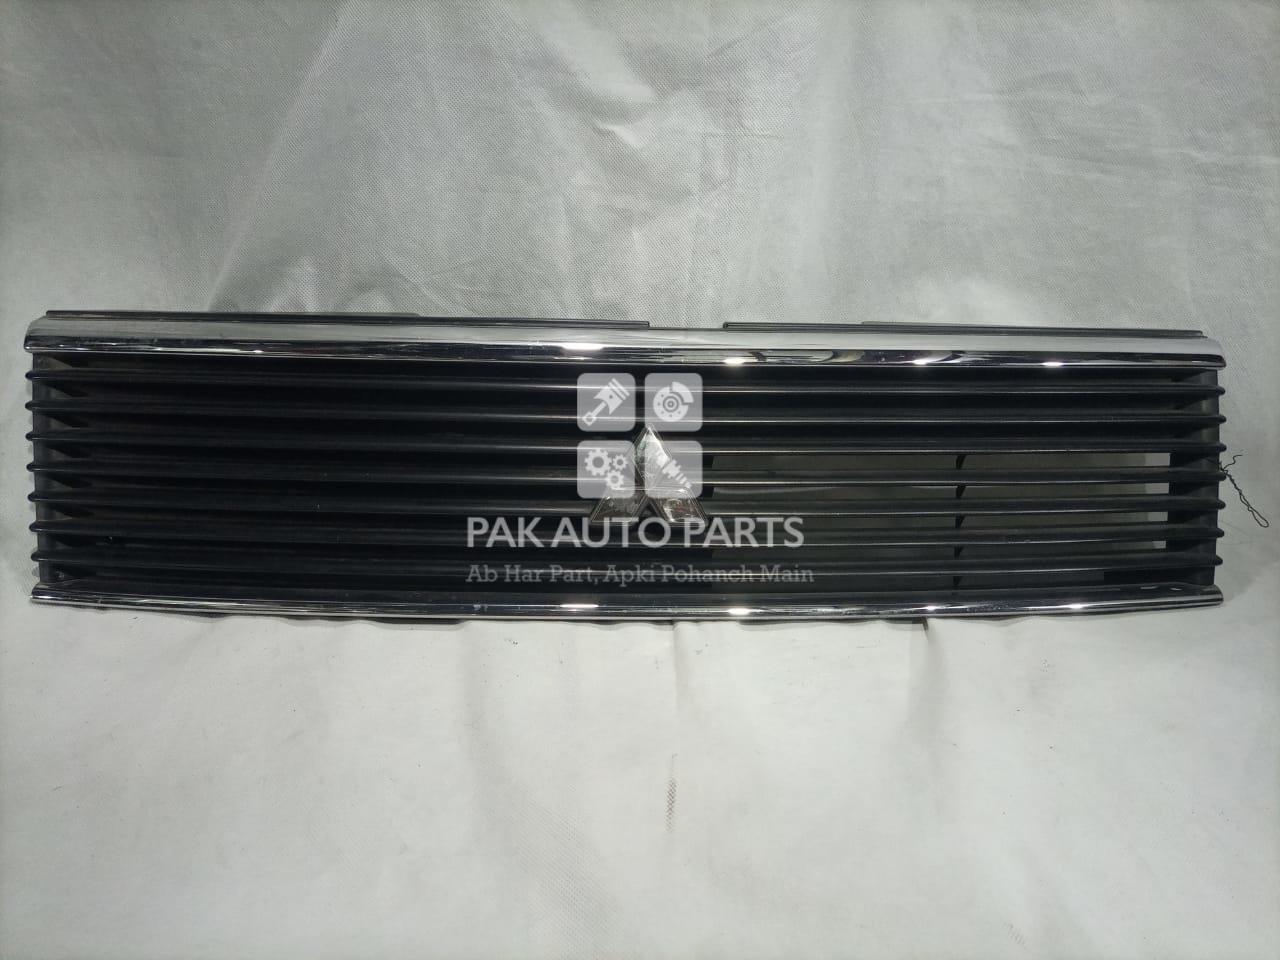 Picture of Mitsubishi Ek Wagon 2006 Front Grill